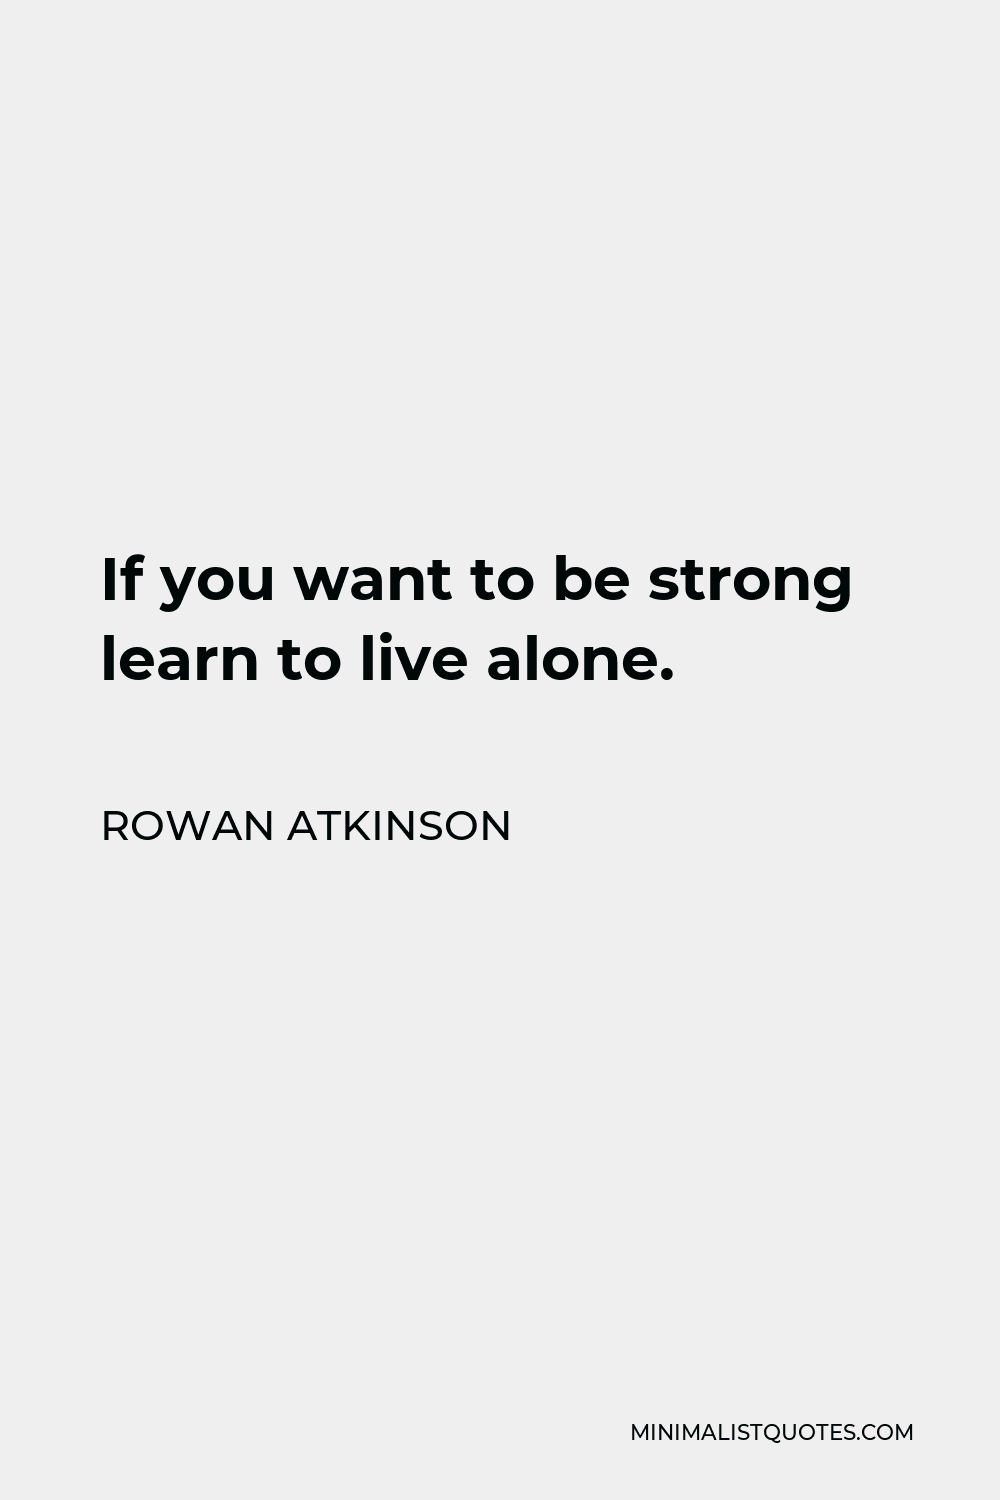 Rowan Atkinson Quote - If you want to be strong learn to live alone.